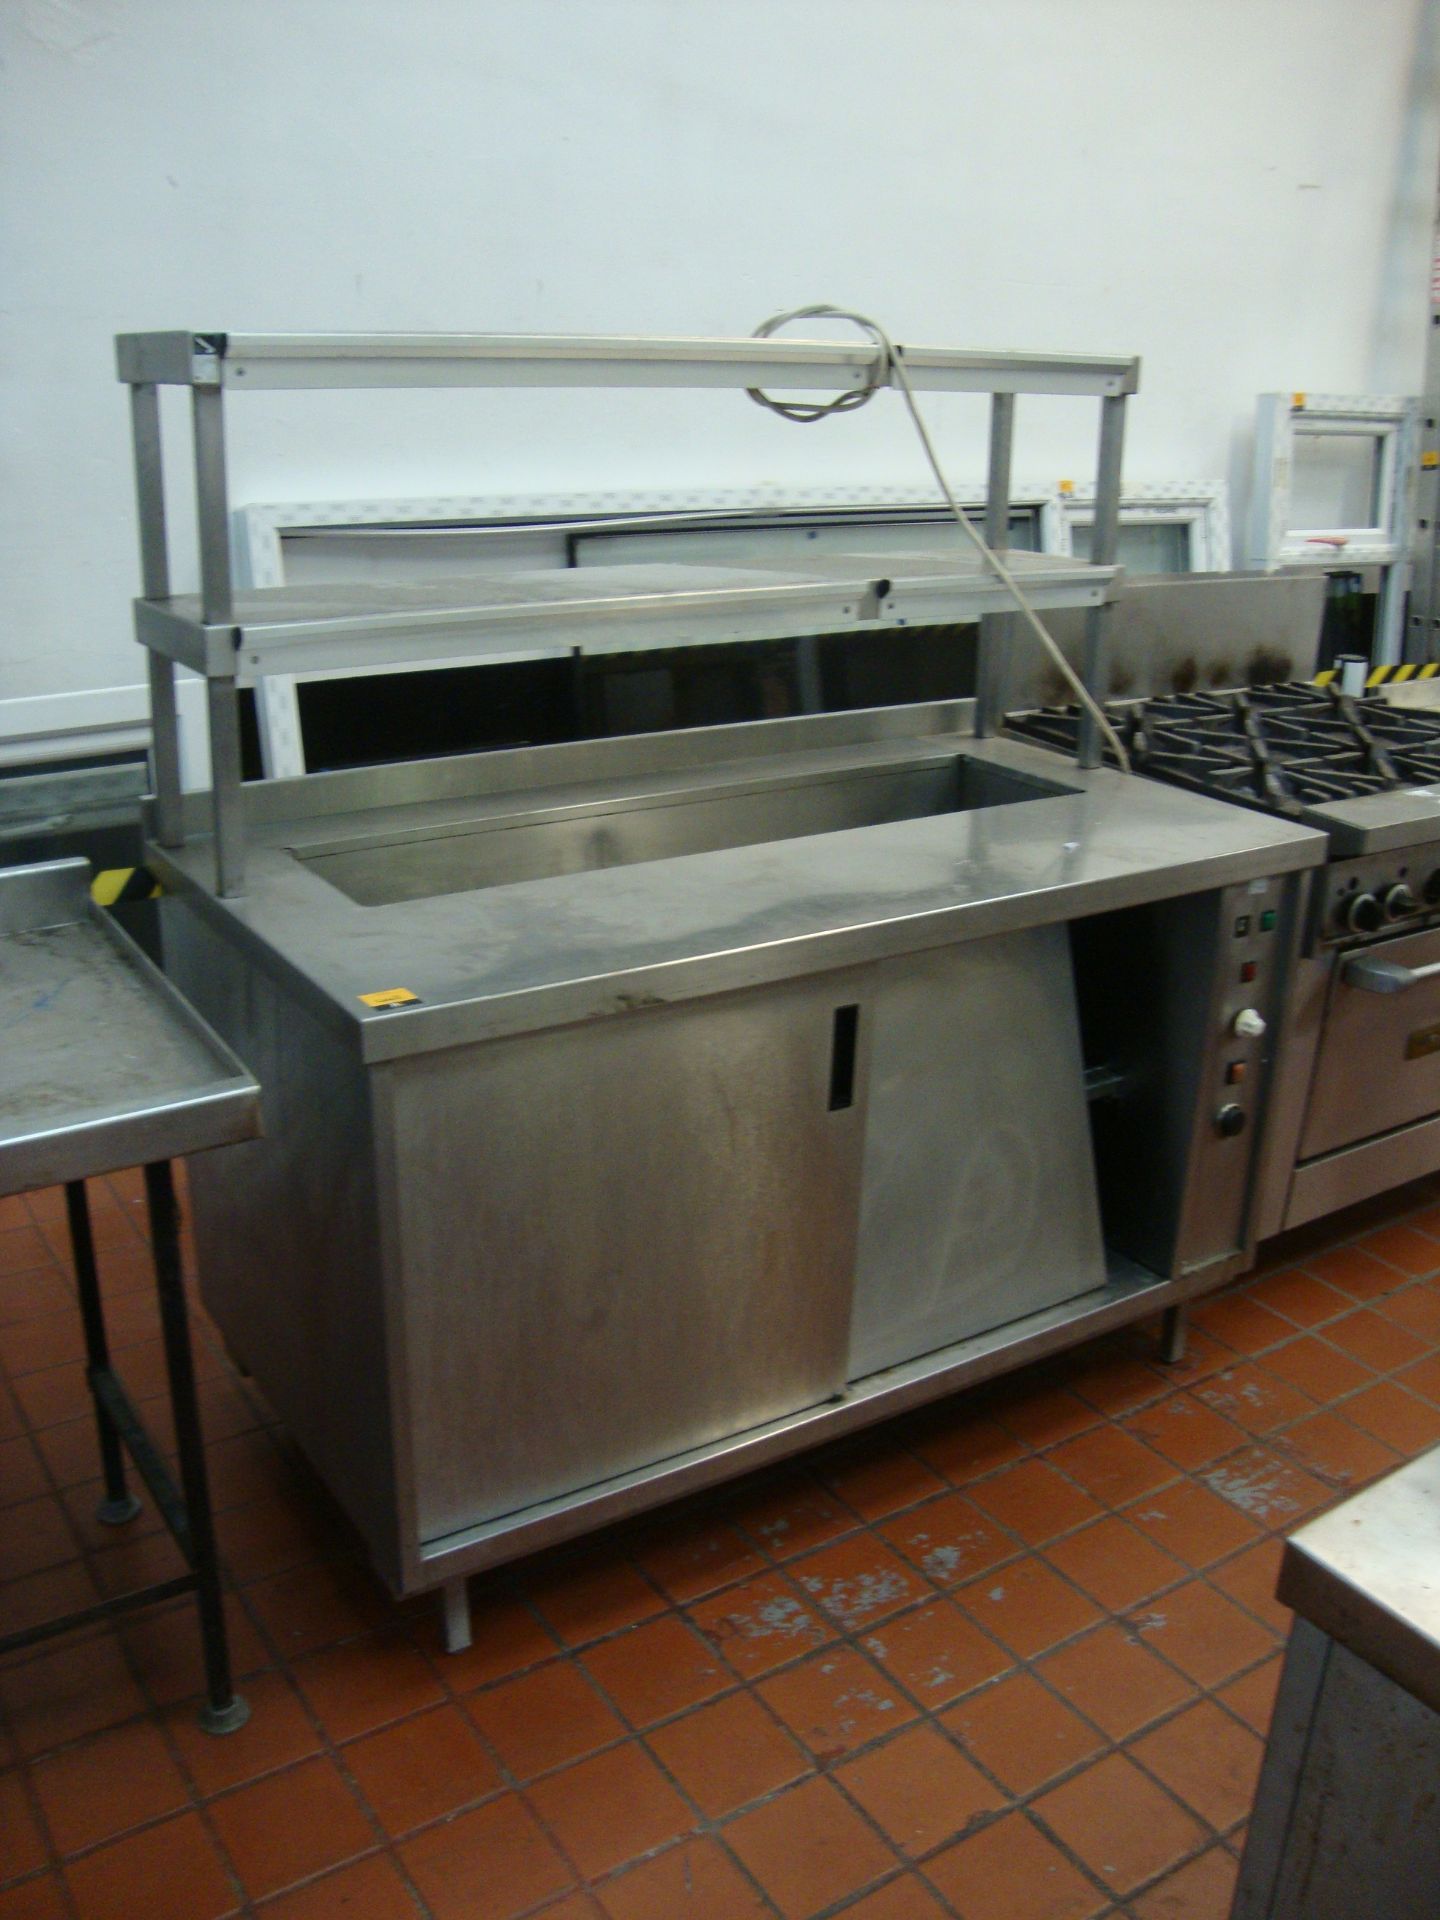 Stainless steel warming cupboard with bain marie section & illuminated serving shelves above, 59" - Image 2 of 4